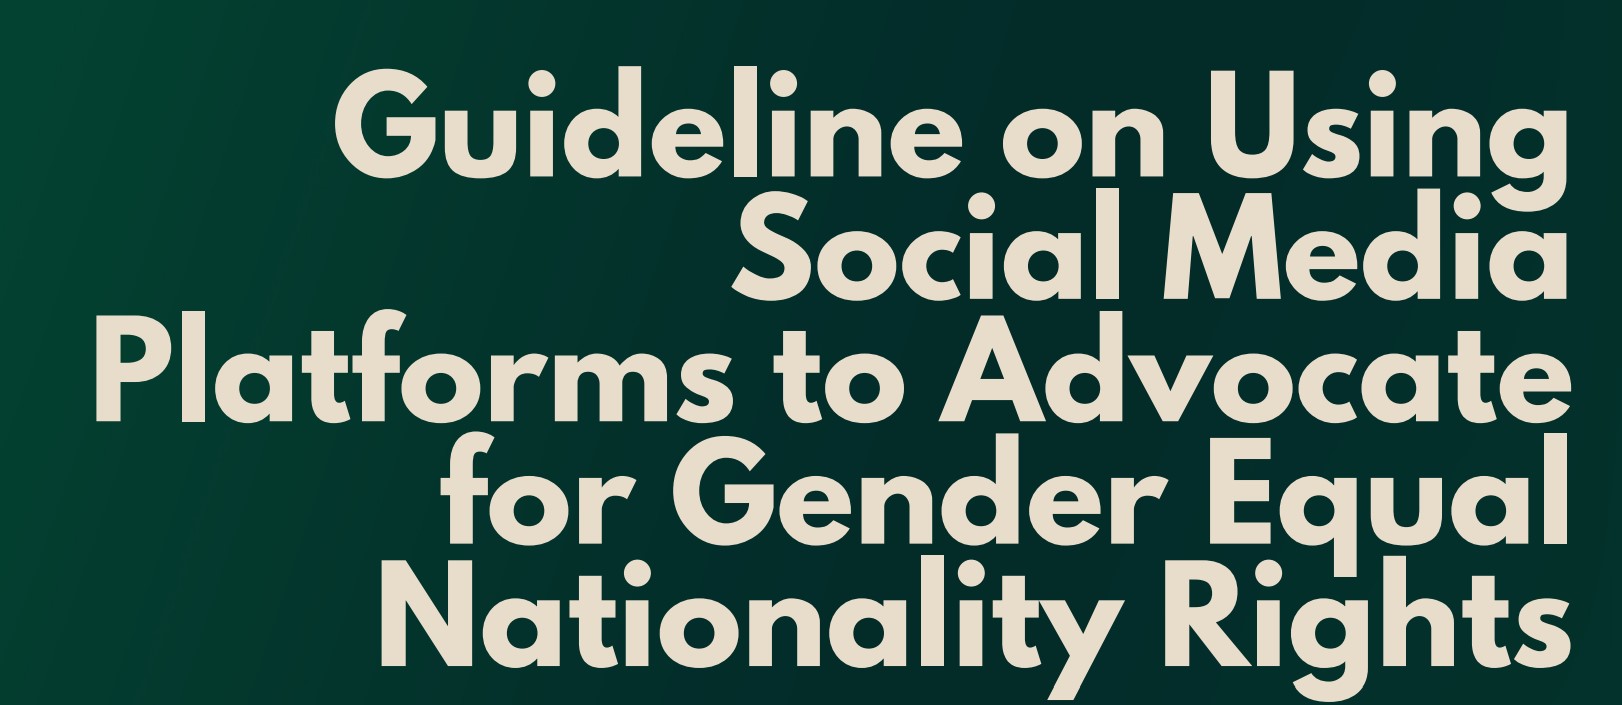 Guideline on Using Social Media Platforms to advocate for gender equal nationality rights